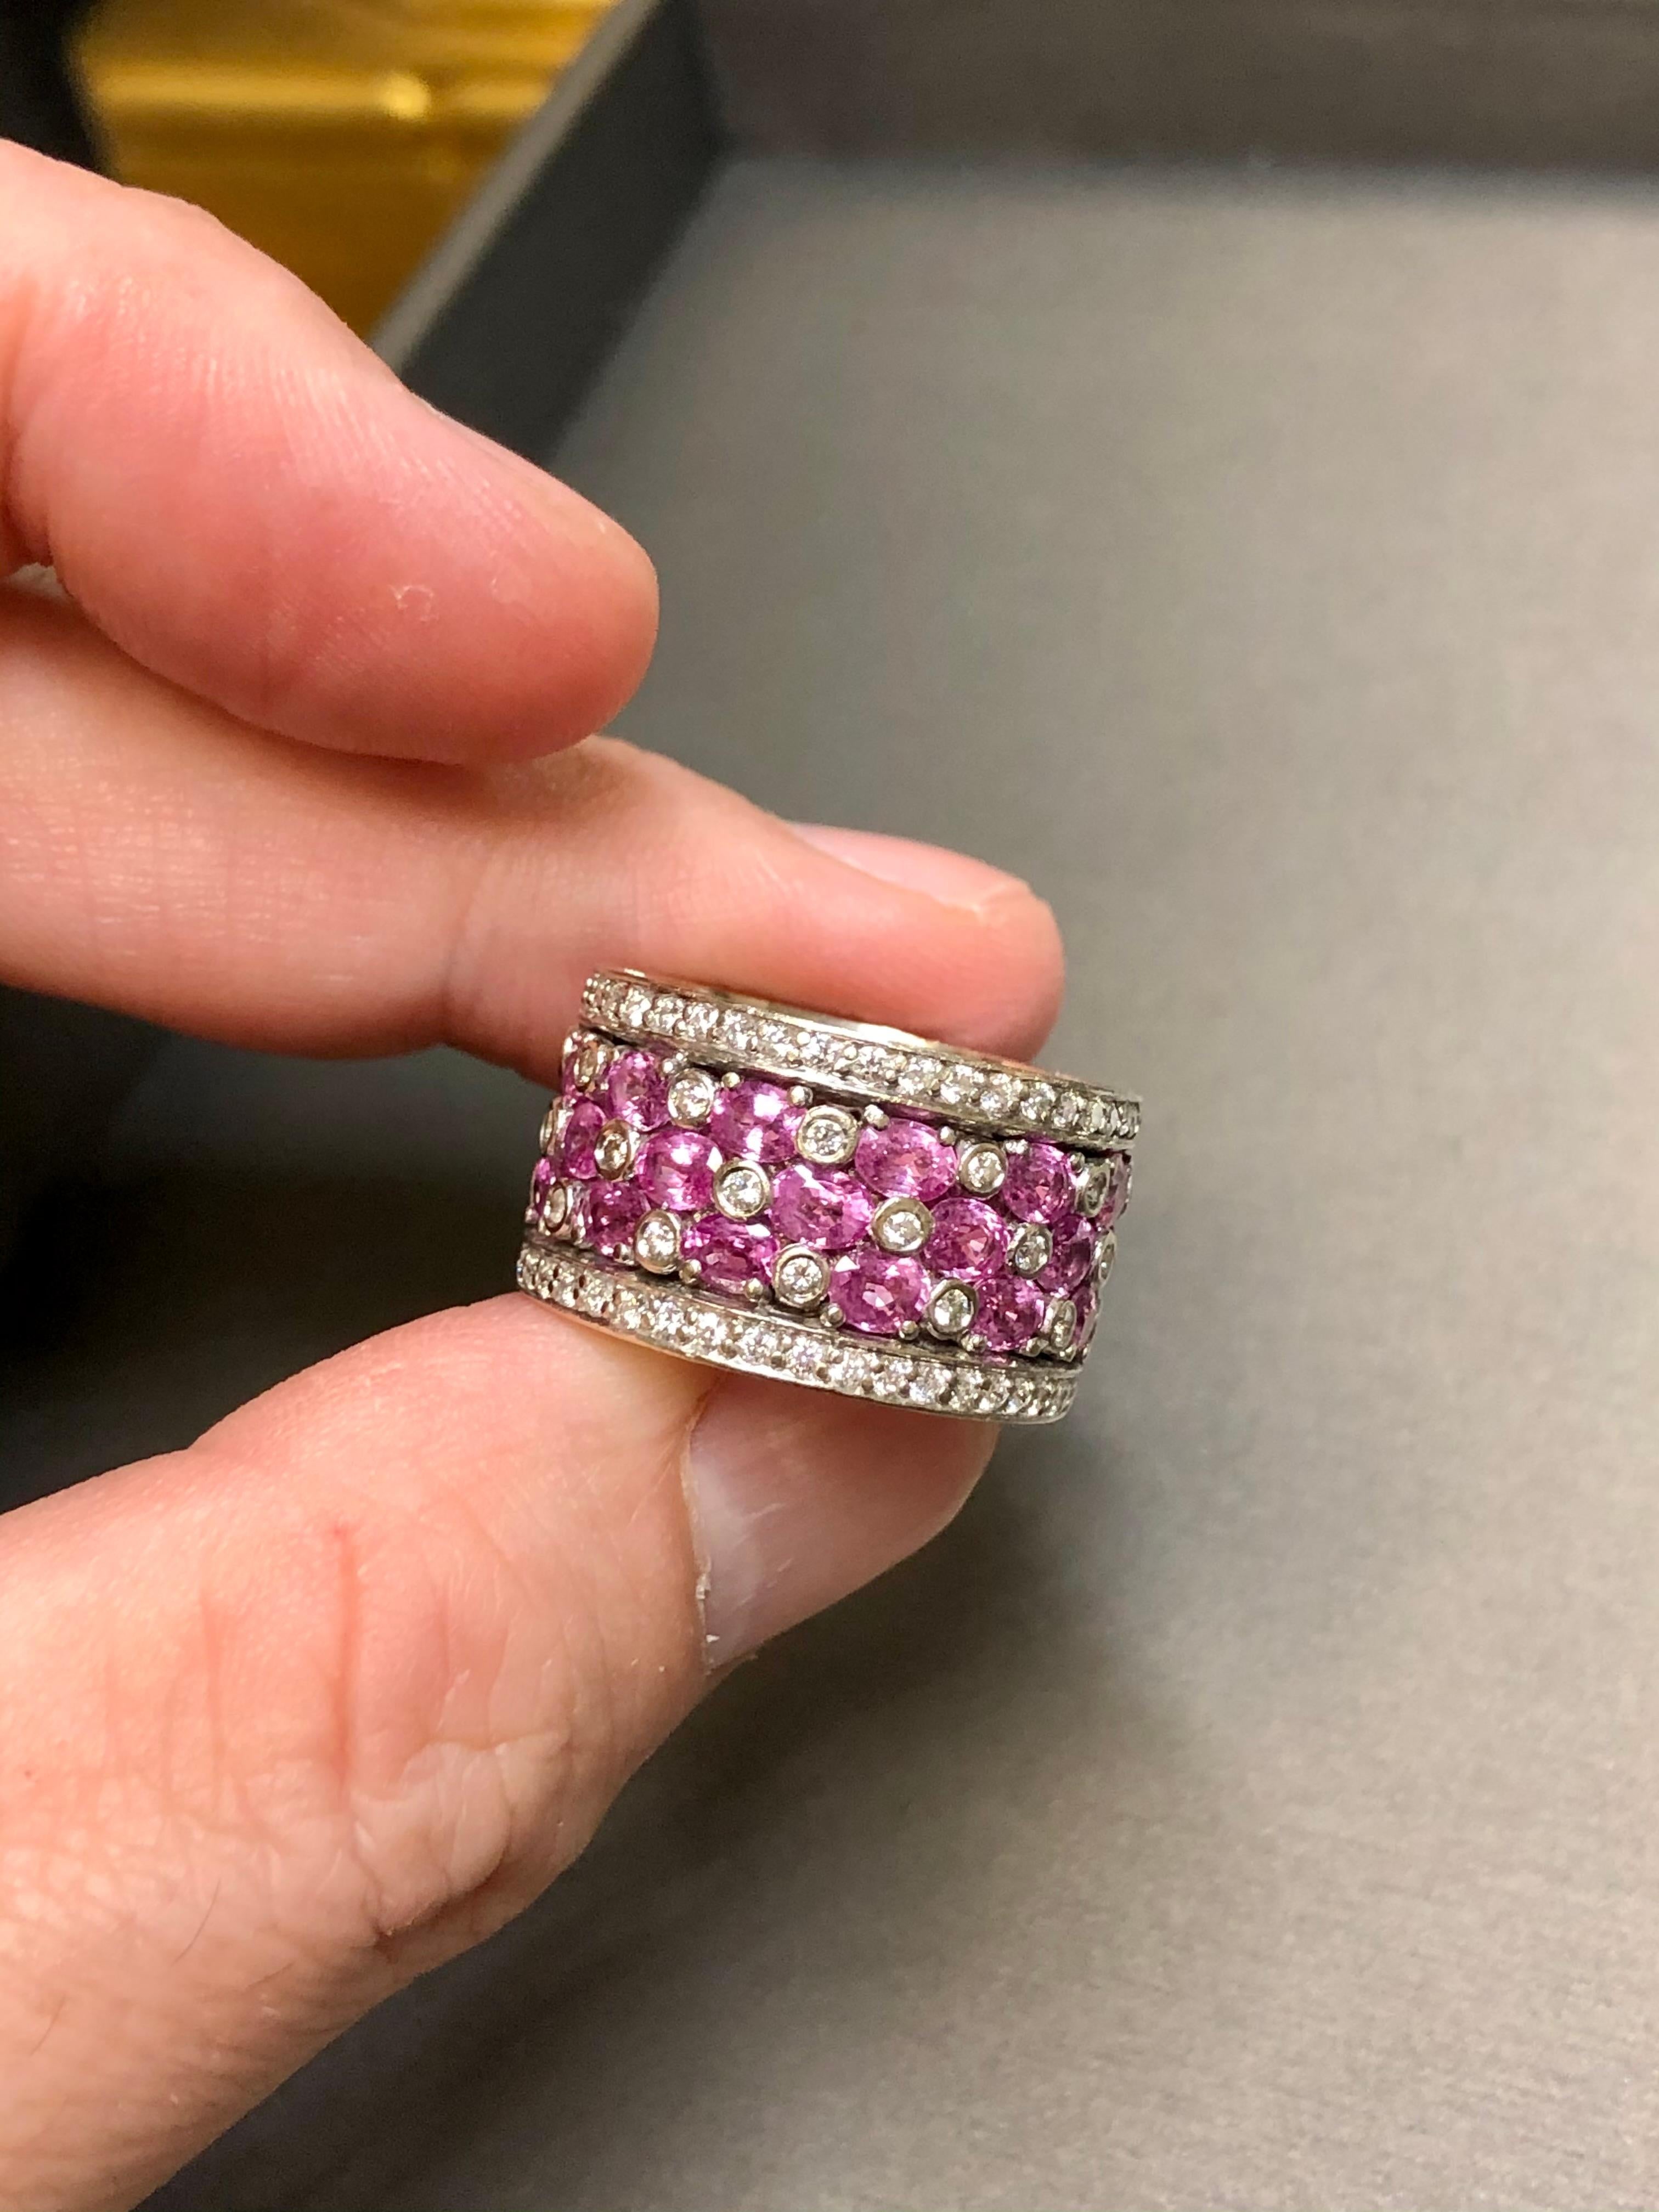 Estate 18K Pink Sapphire Diamond Wide Band Cocktail Ring 10.86cttw Sz 6.25 For Sale 3